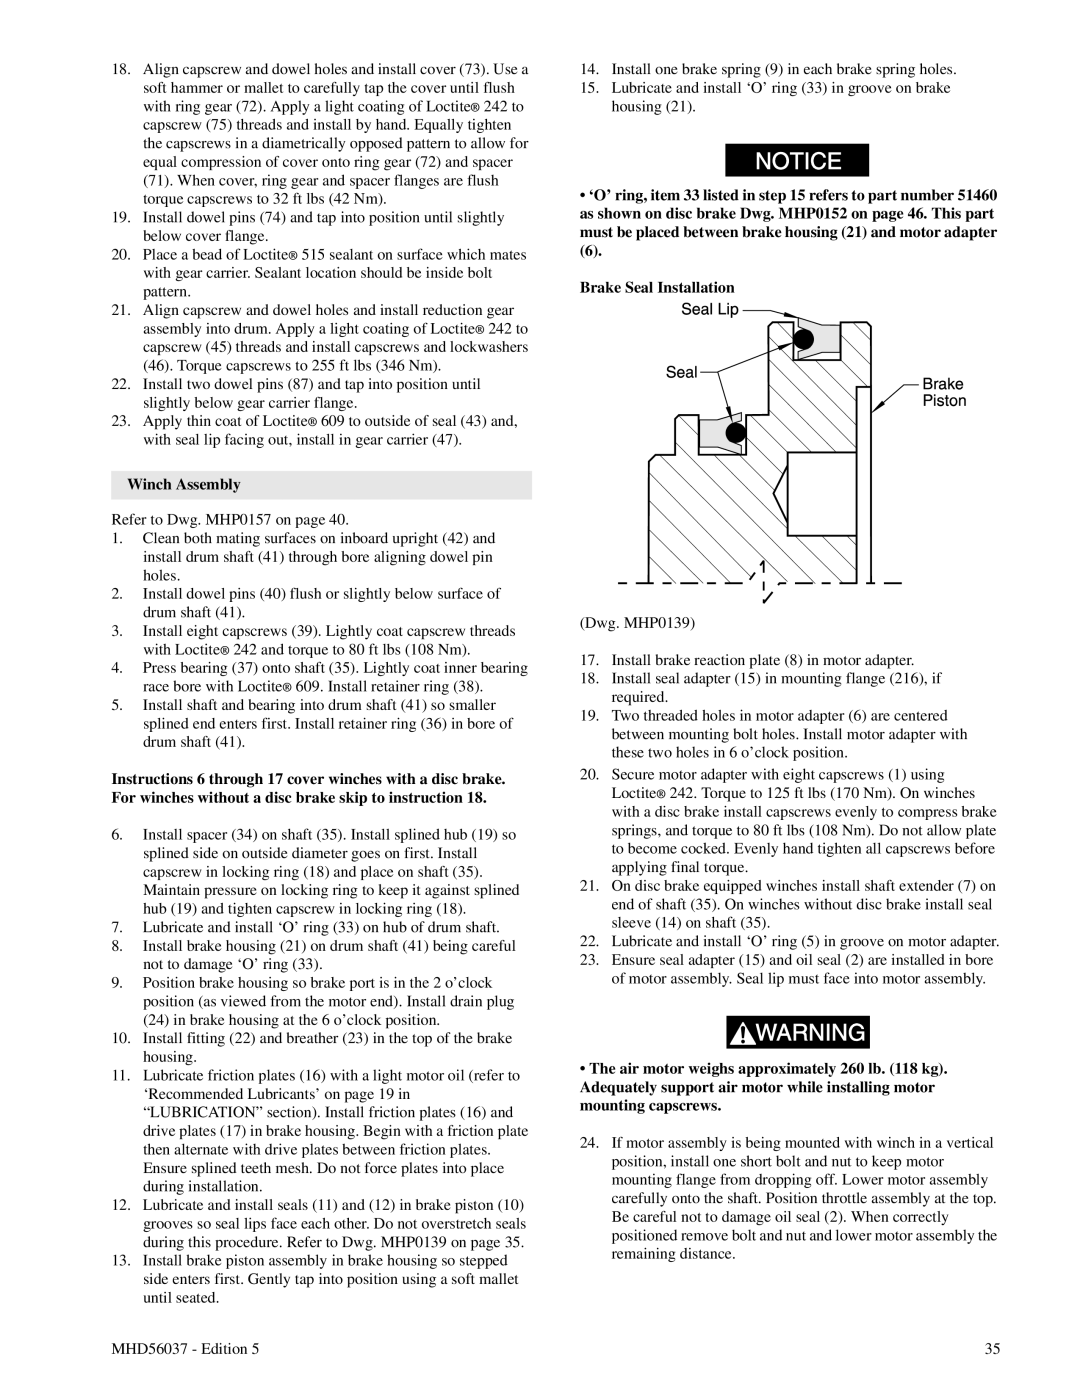 Ingersoll-Rand FA5T manual Winch Assembly, Brake Seal Installation 